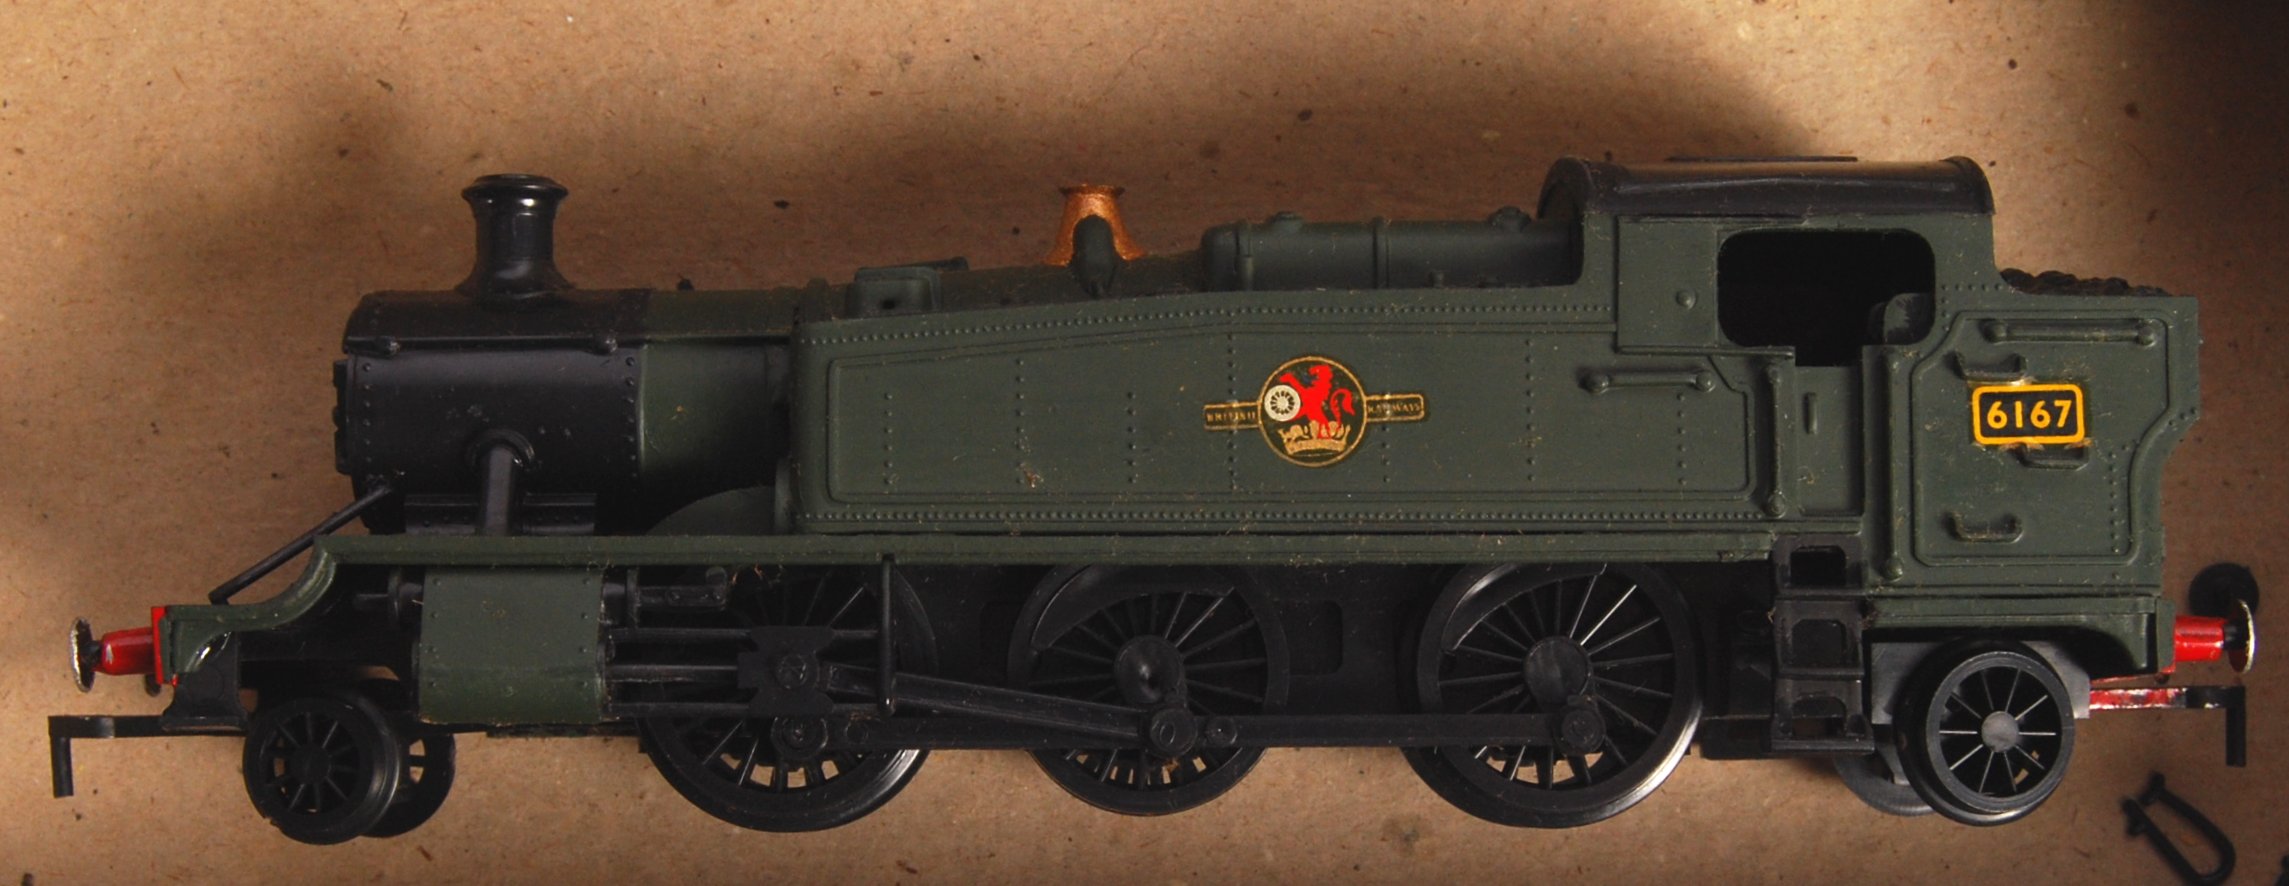 COLLECTION OF ASSORTED KIT BUILT MODEL RAILWAY LOCOS AND WAGONS - Image 6 of 6